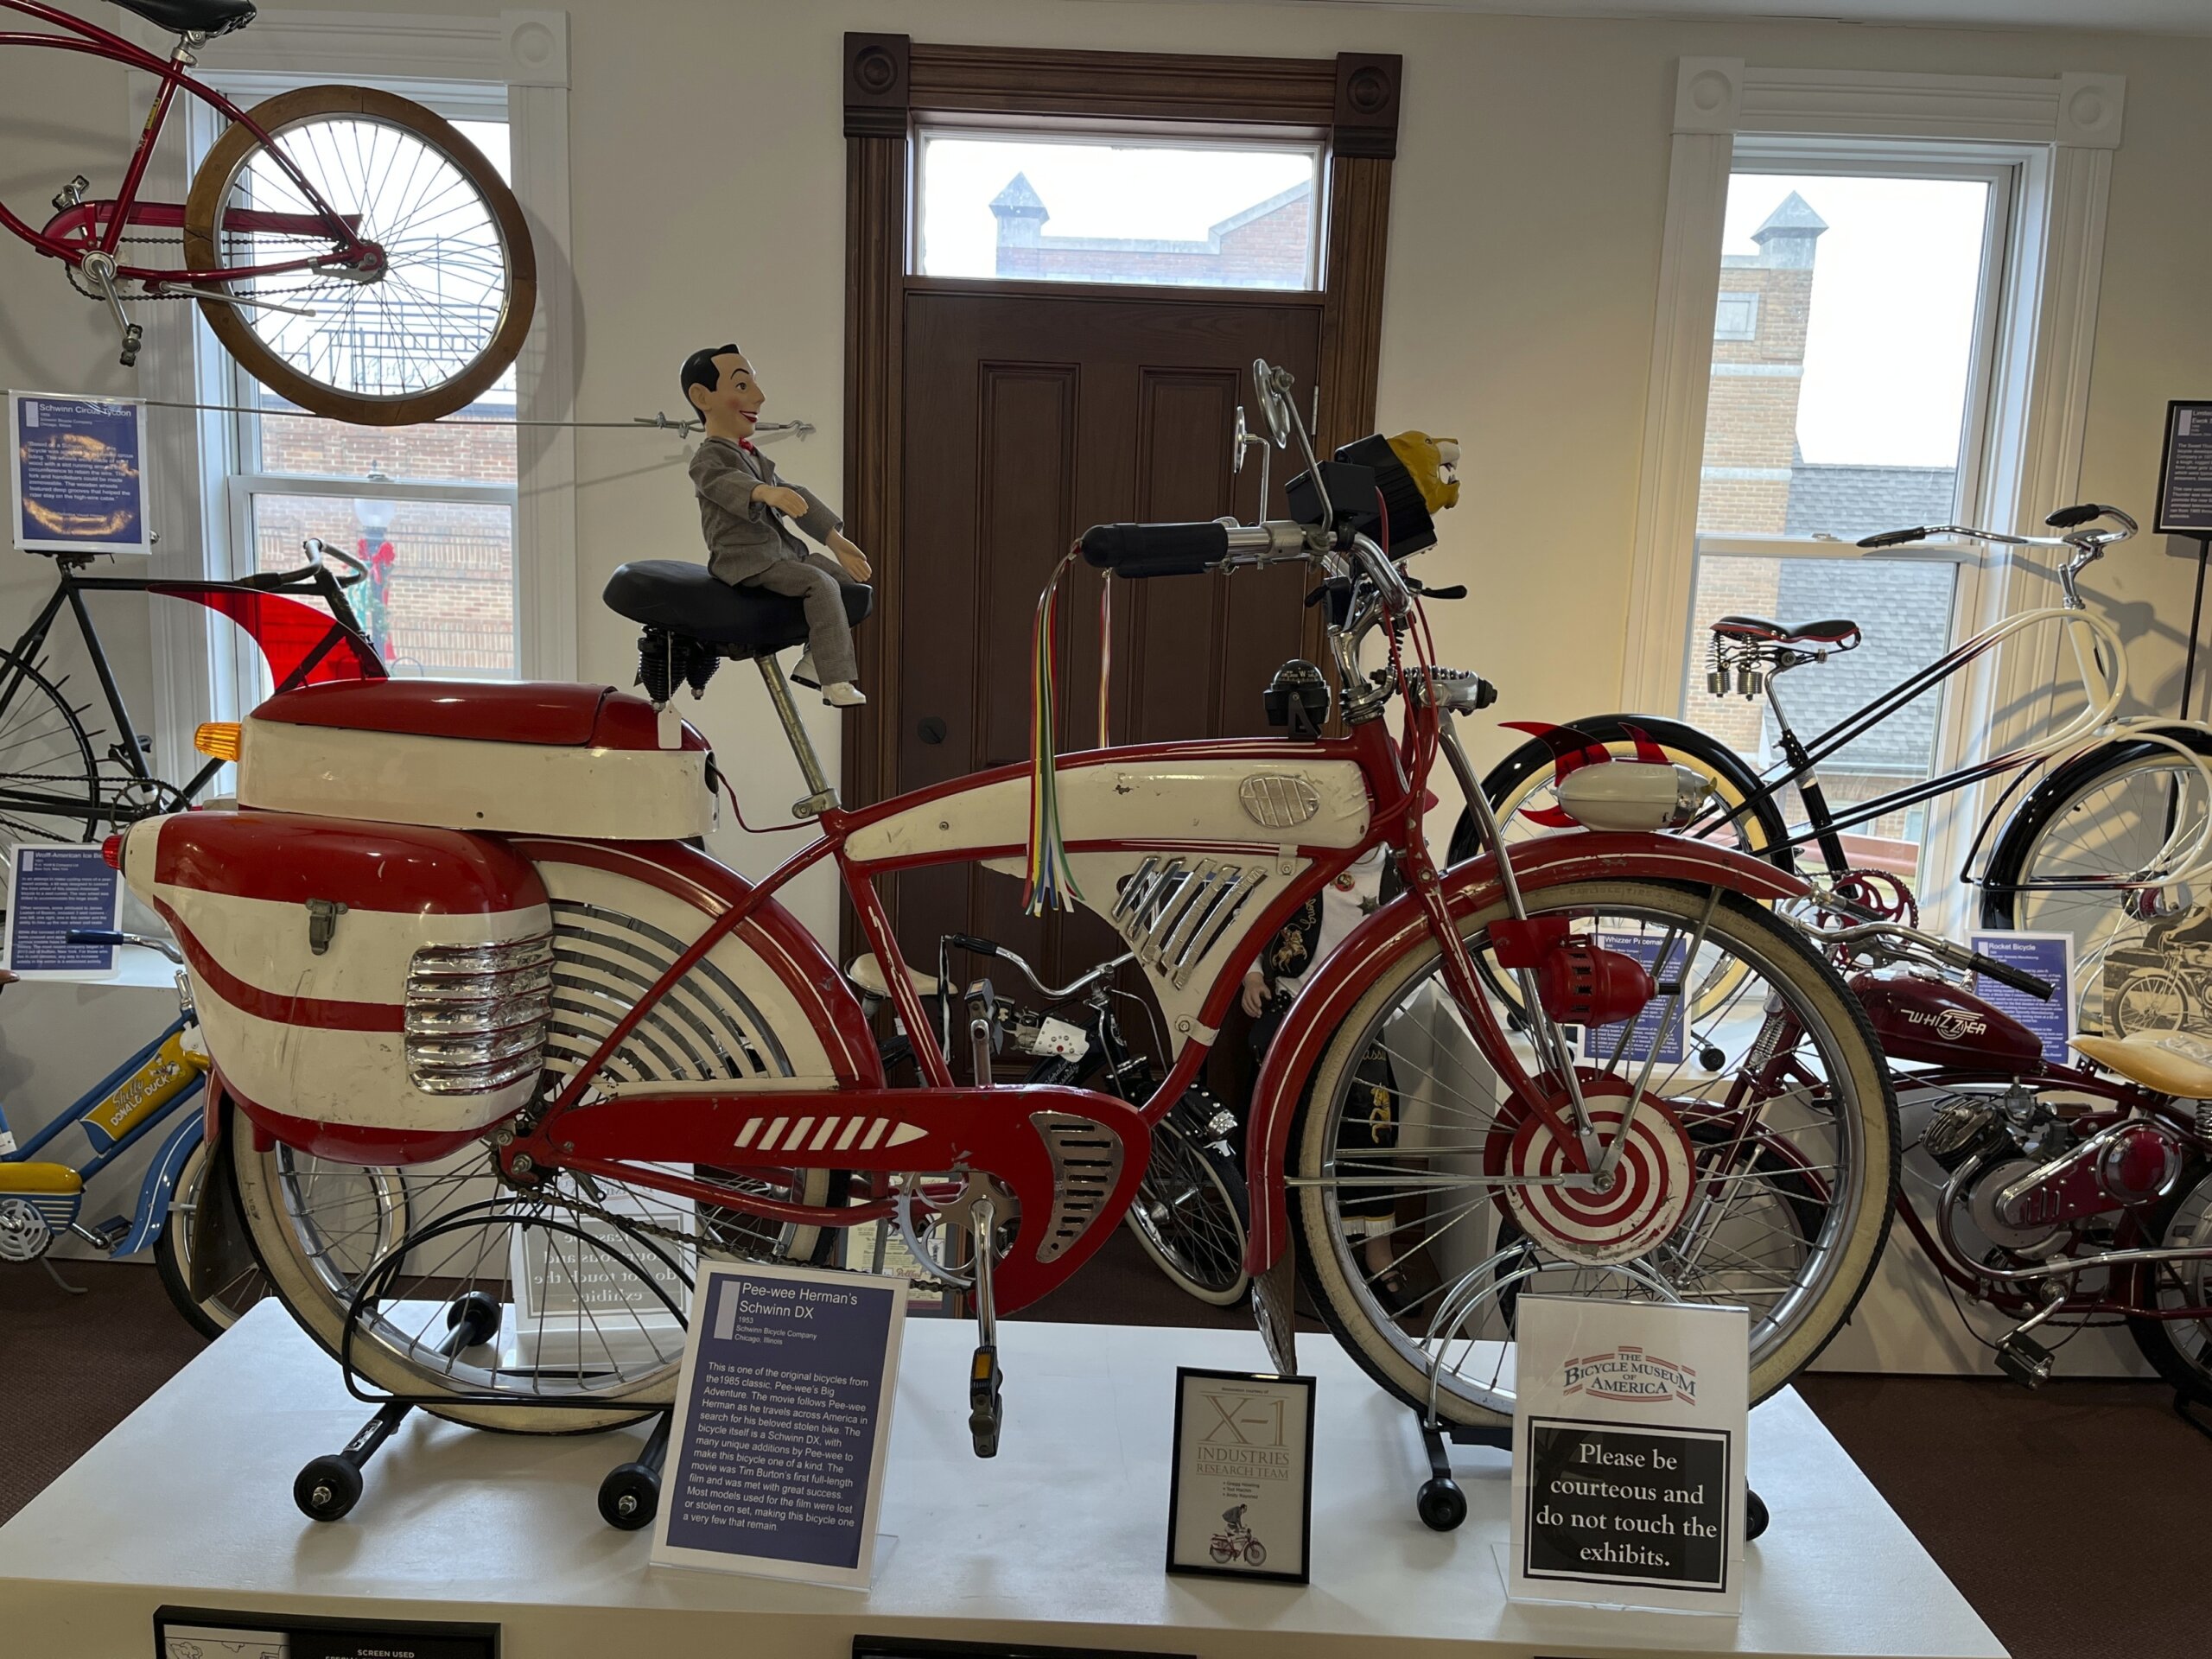 Pedal through cycling history at this Ohio bike museum